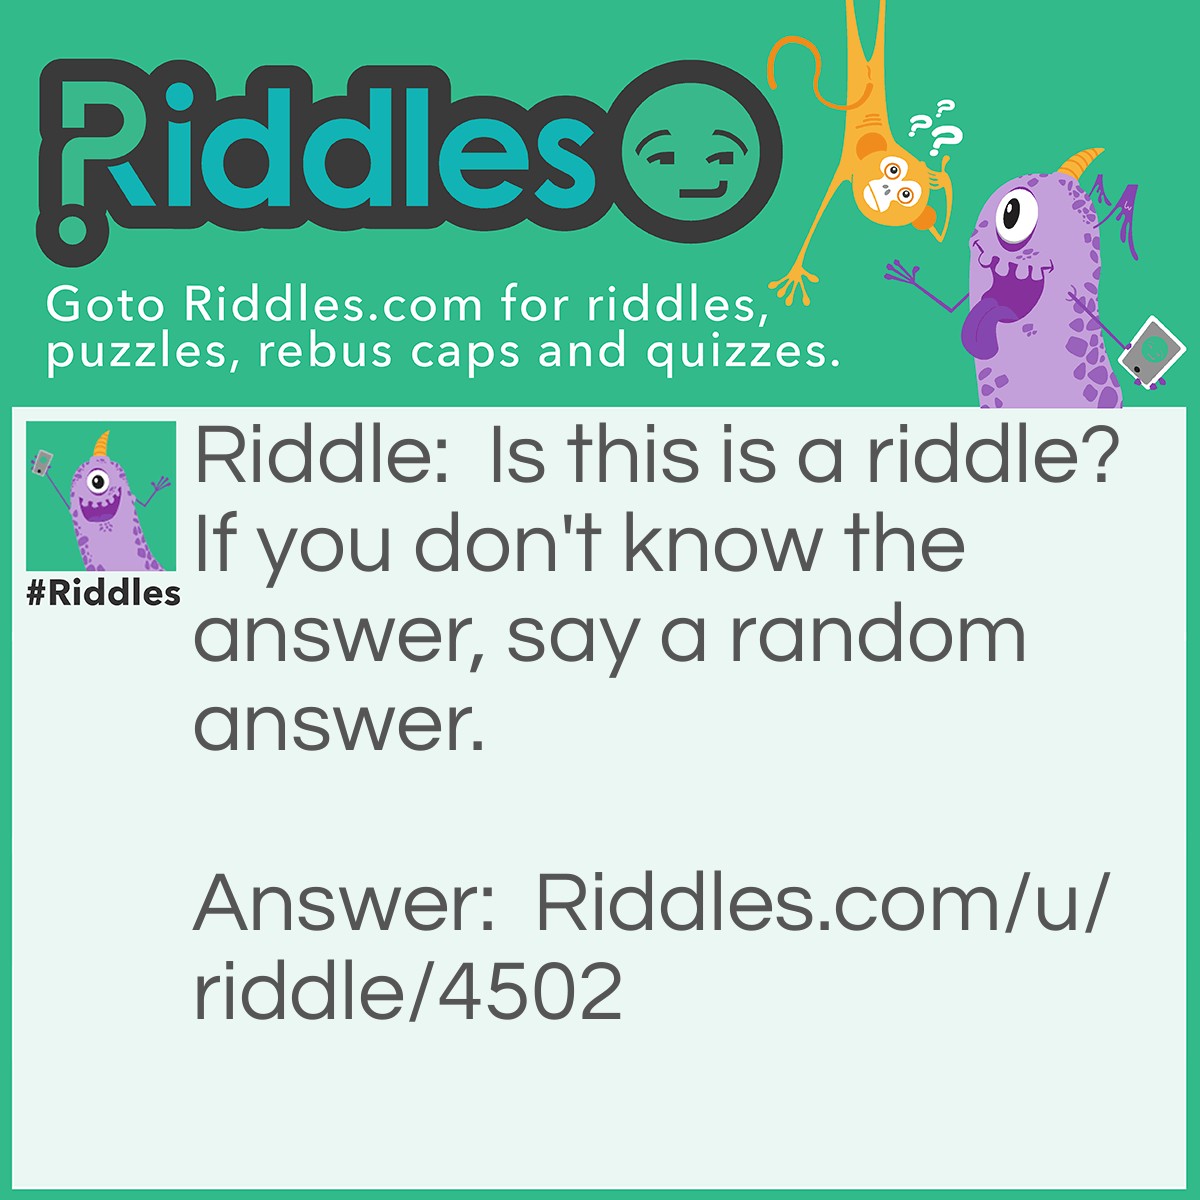 Riddle: Is this is a riddle? If you don't know the answer, say a random answer. Answer: A random answer